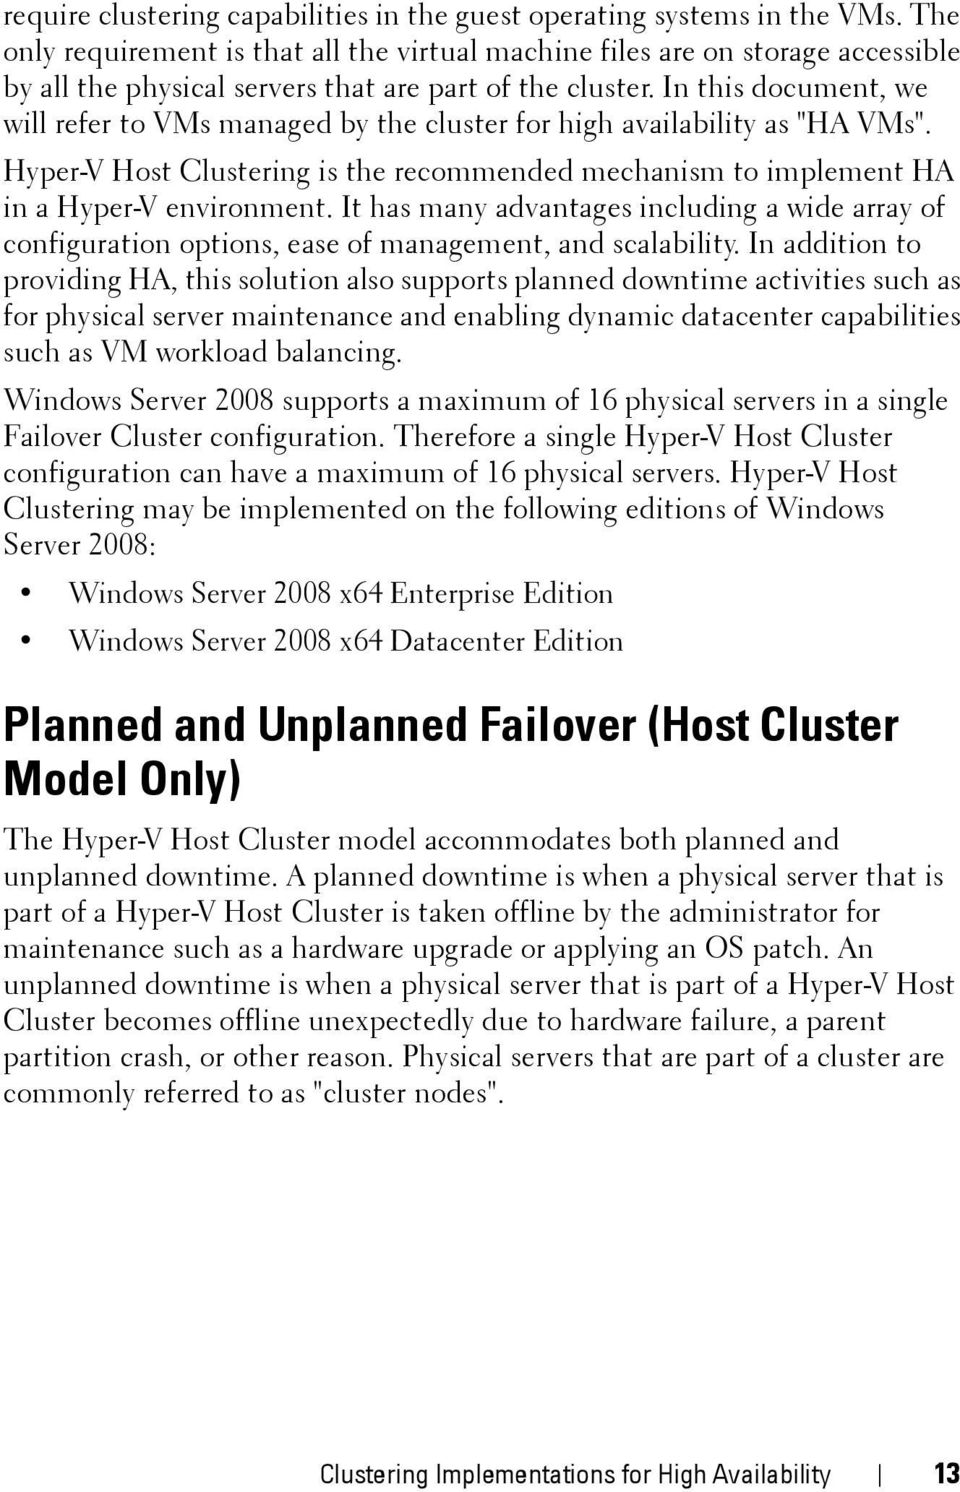 In this document, we will refer to VMs managed by the cluster for high availability as "HA VMs". Hyper-V Host Clustering is the recommended mechanism to implement HA in a Hyper-V environment.